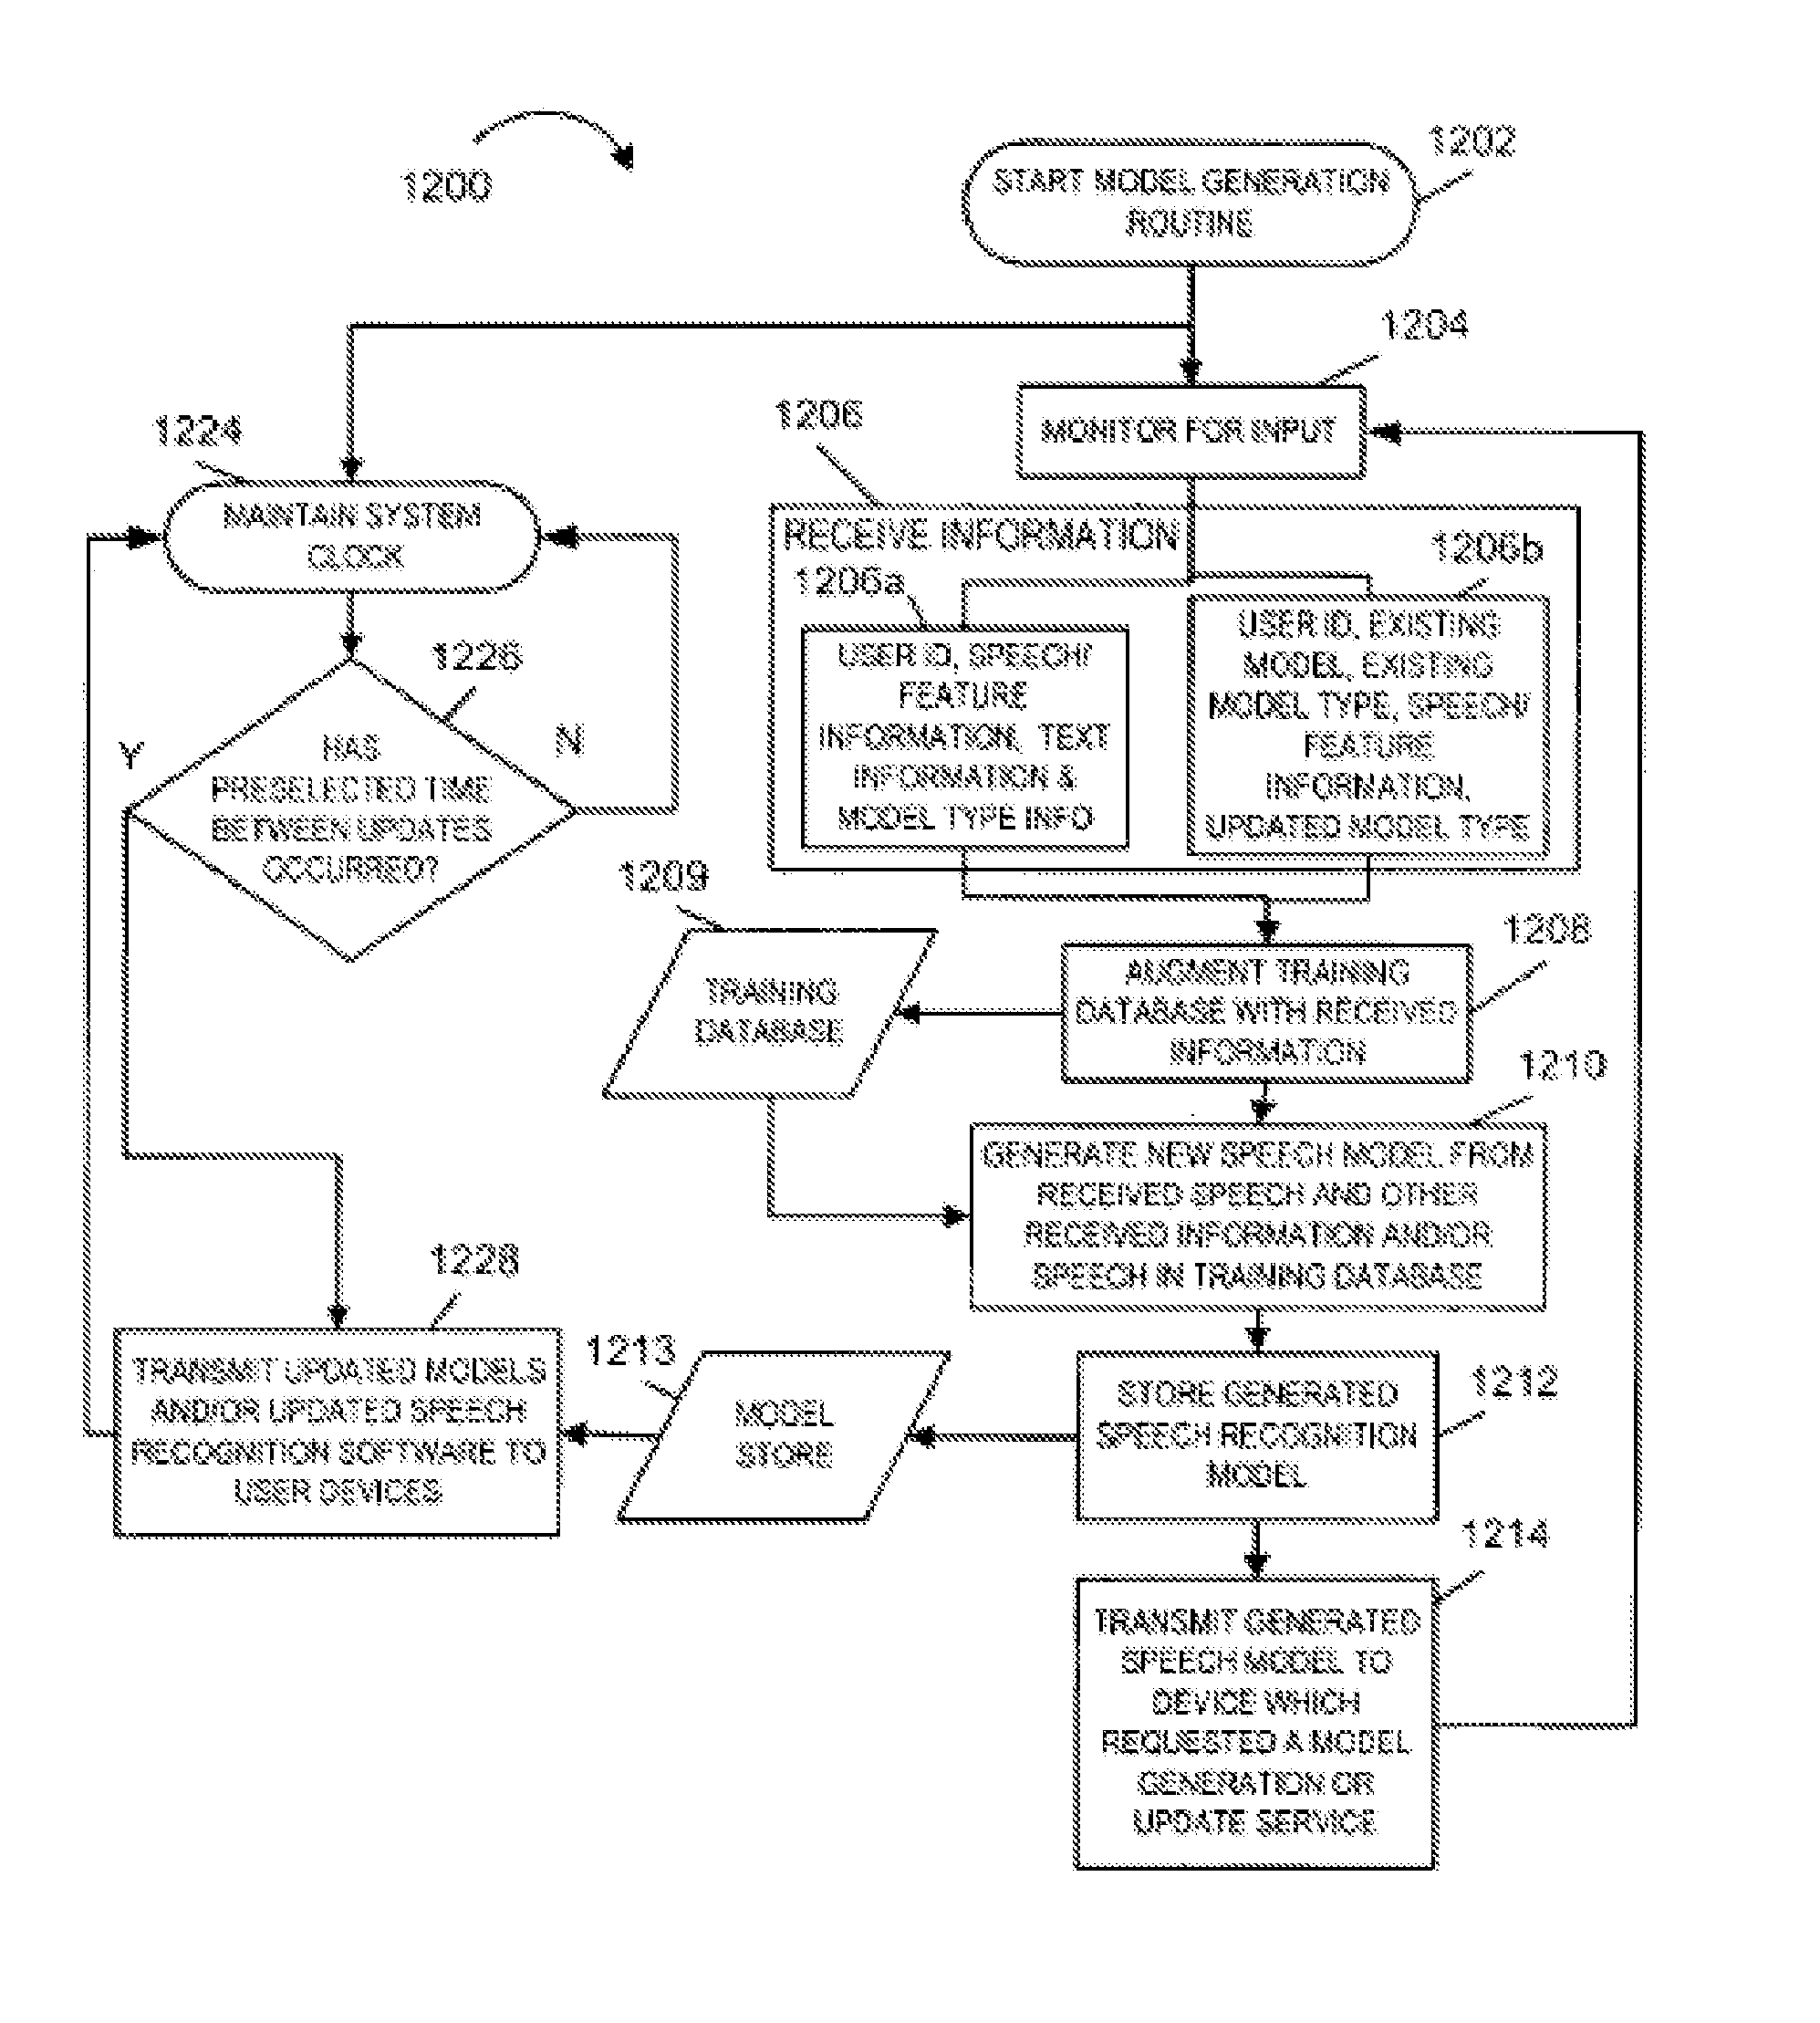 Performing speech recognition over a network and using speech recognition results